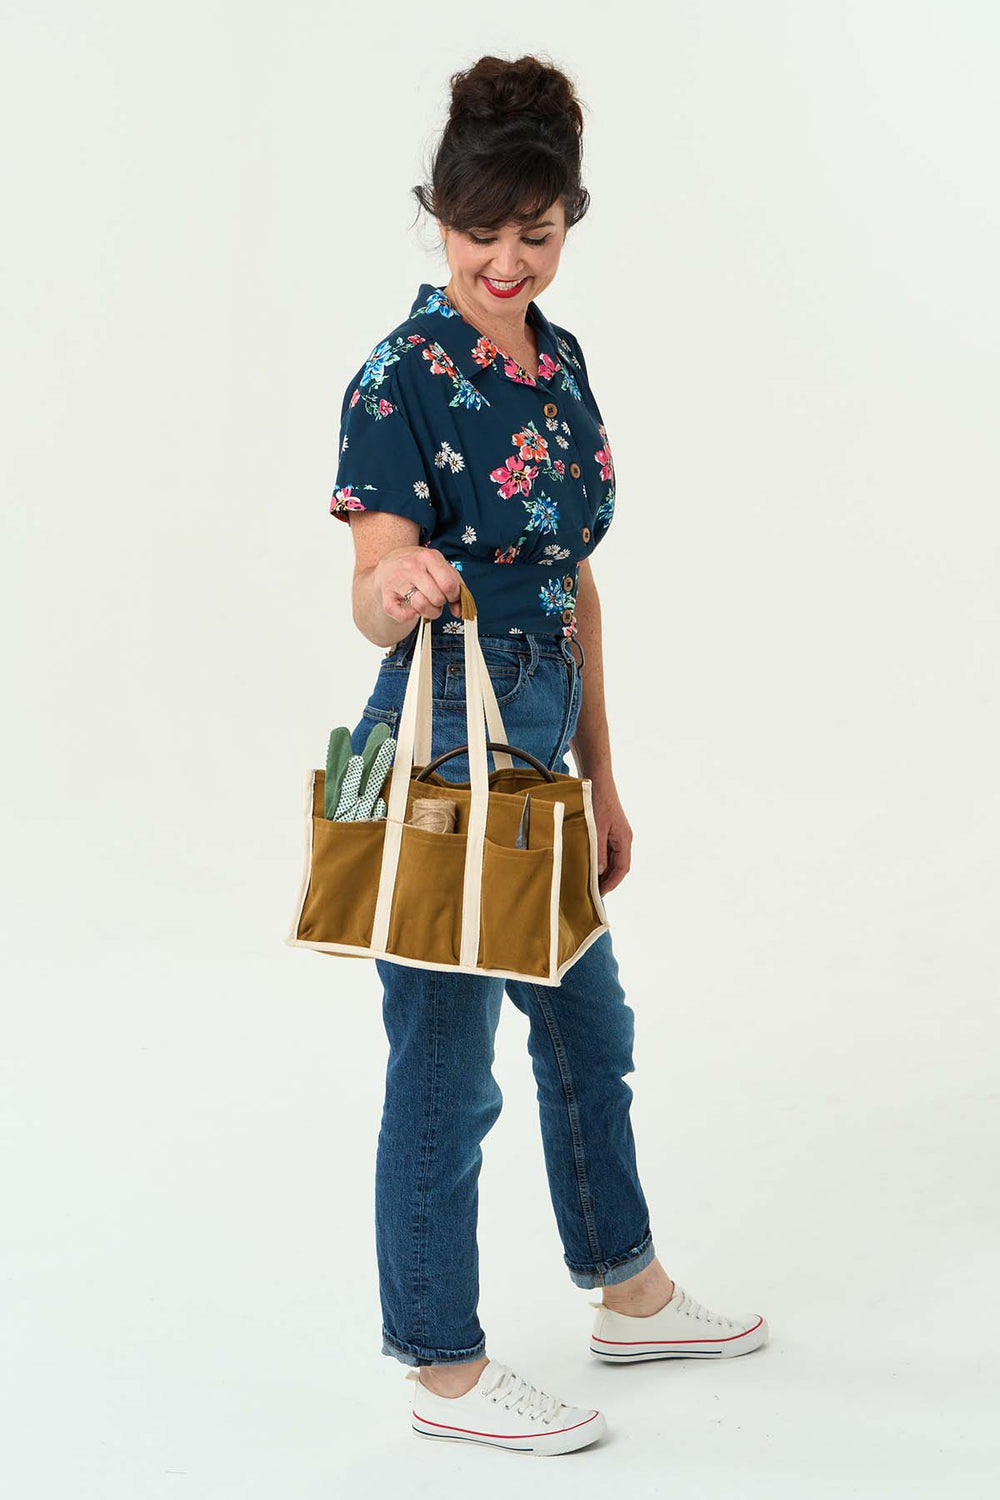 Women holding the Hobby Bag sewing pattern from Sew Over It on The Fold Line. A bag pattern made in cotton twill, cotton drill, canvas or denim fabrics, featuring eight outer pockets, two inner pockets, bound side and bottom edges, and twill tape short ca